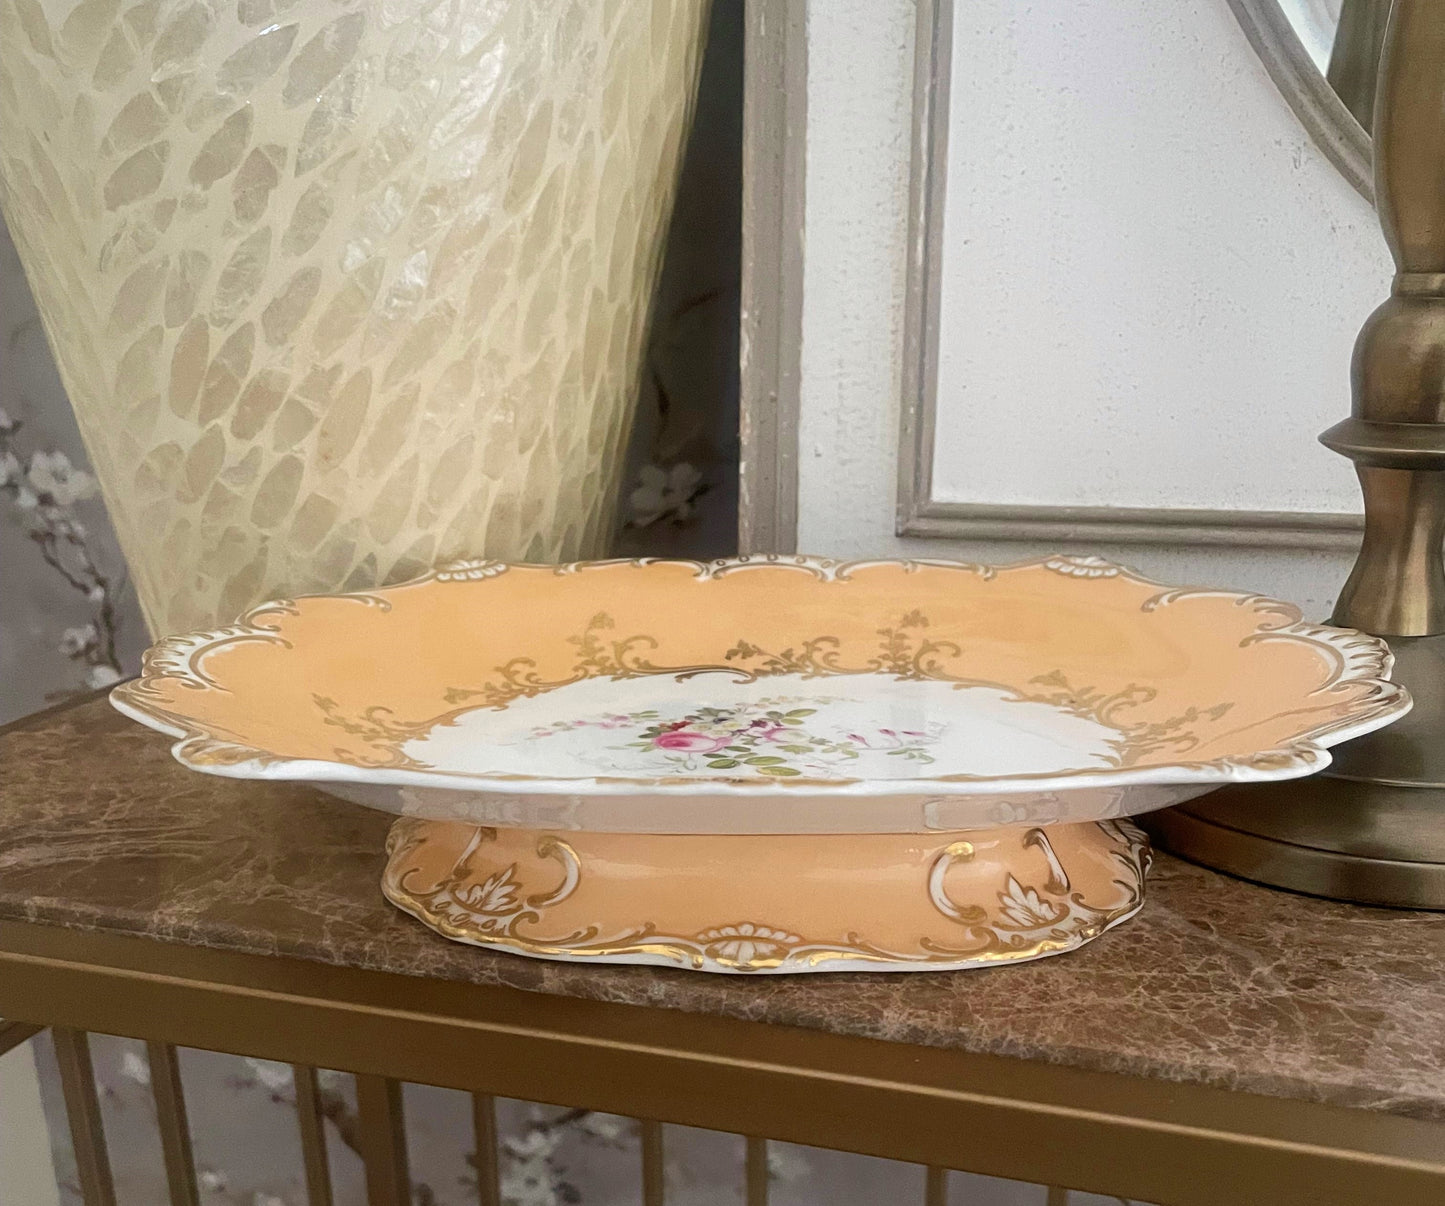 Antique Victorian Hand Painted Oval Compote